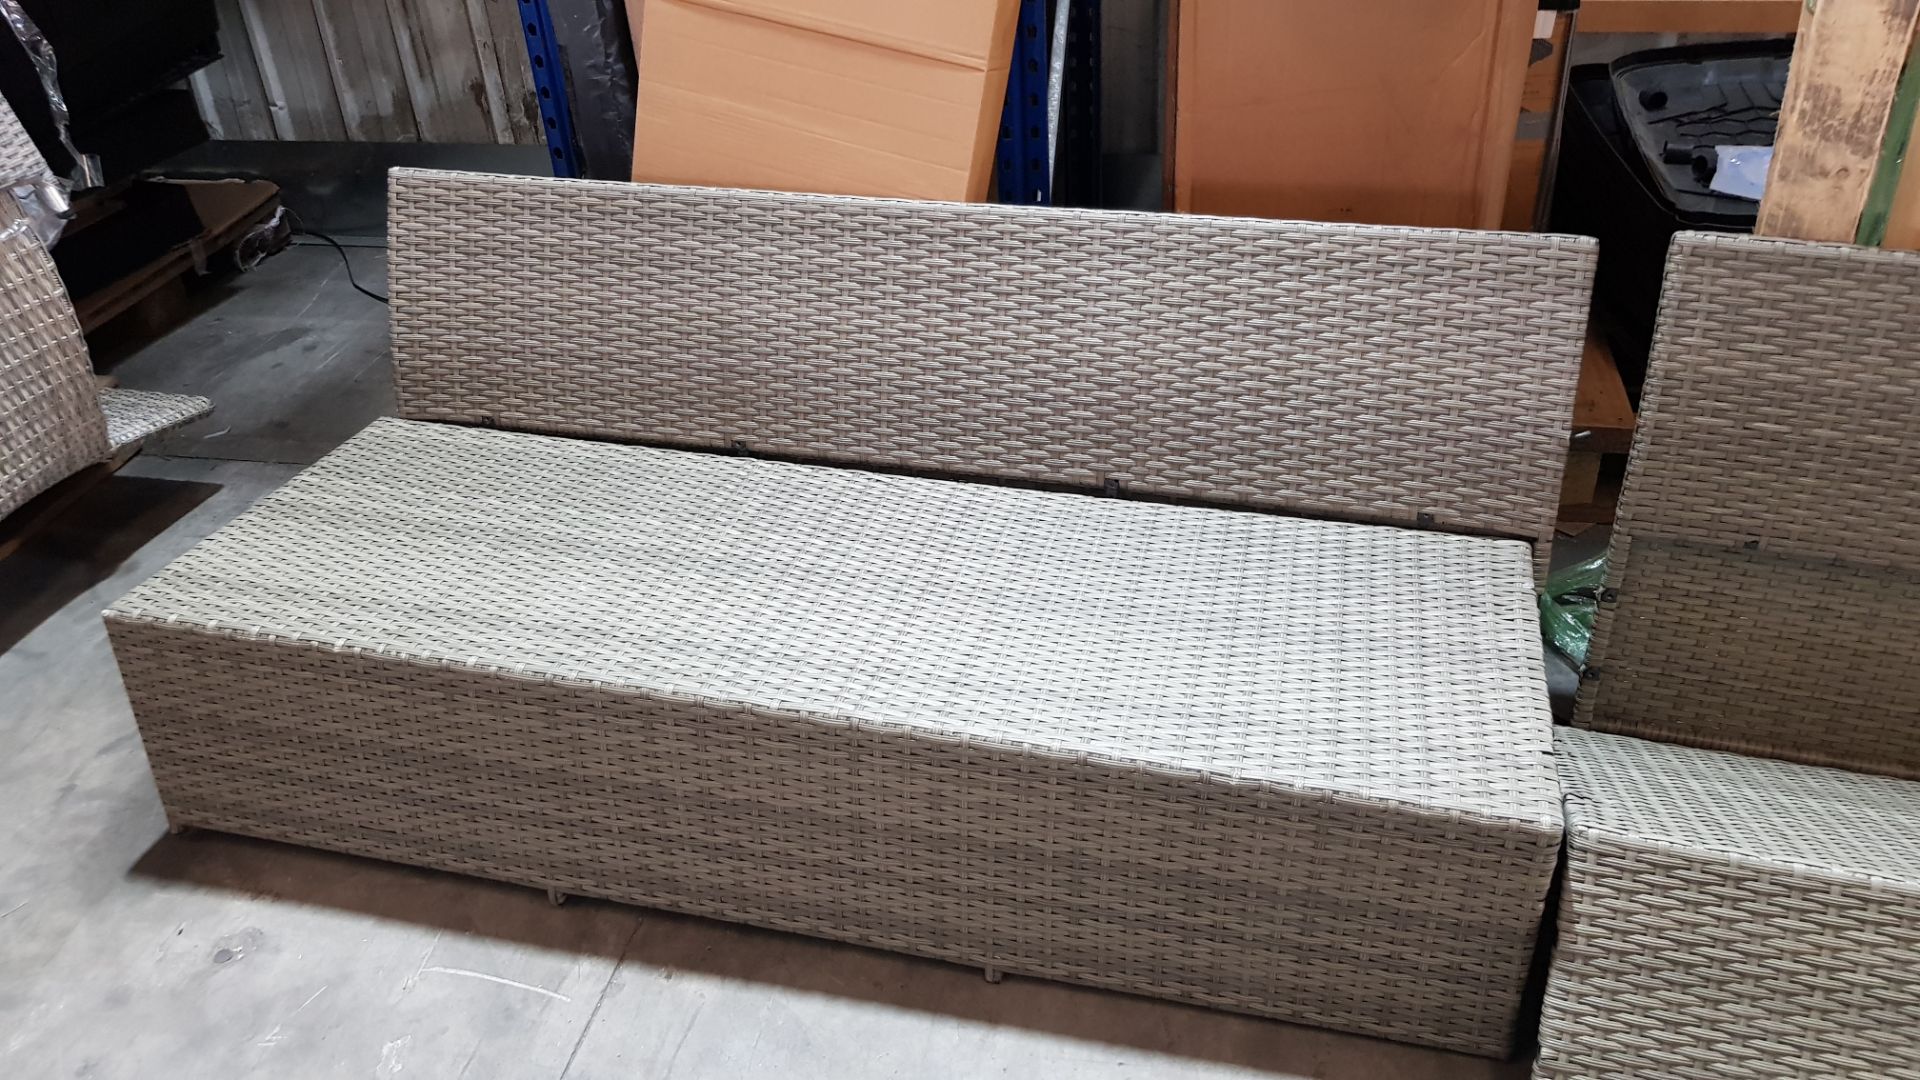 (55/2H) Rattan Garden Furniture Parts. To Include 3x 3 Seater Sofa. 1x Small Square Table With Gl...